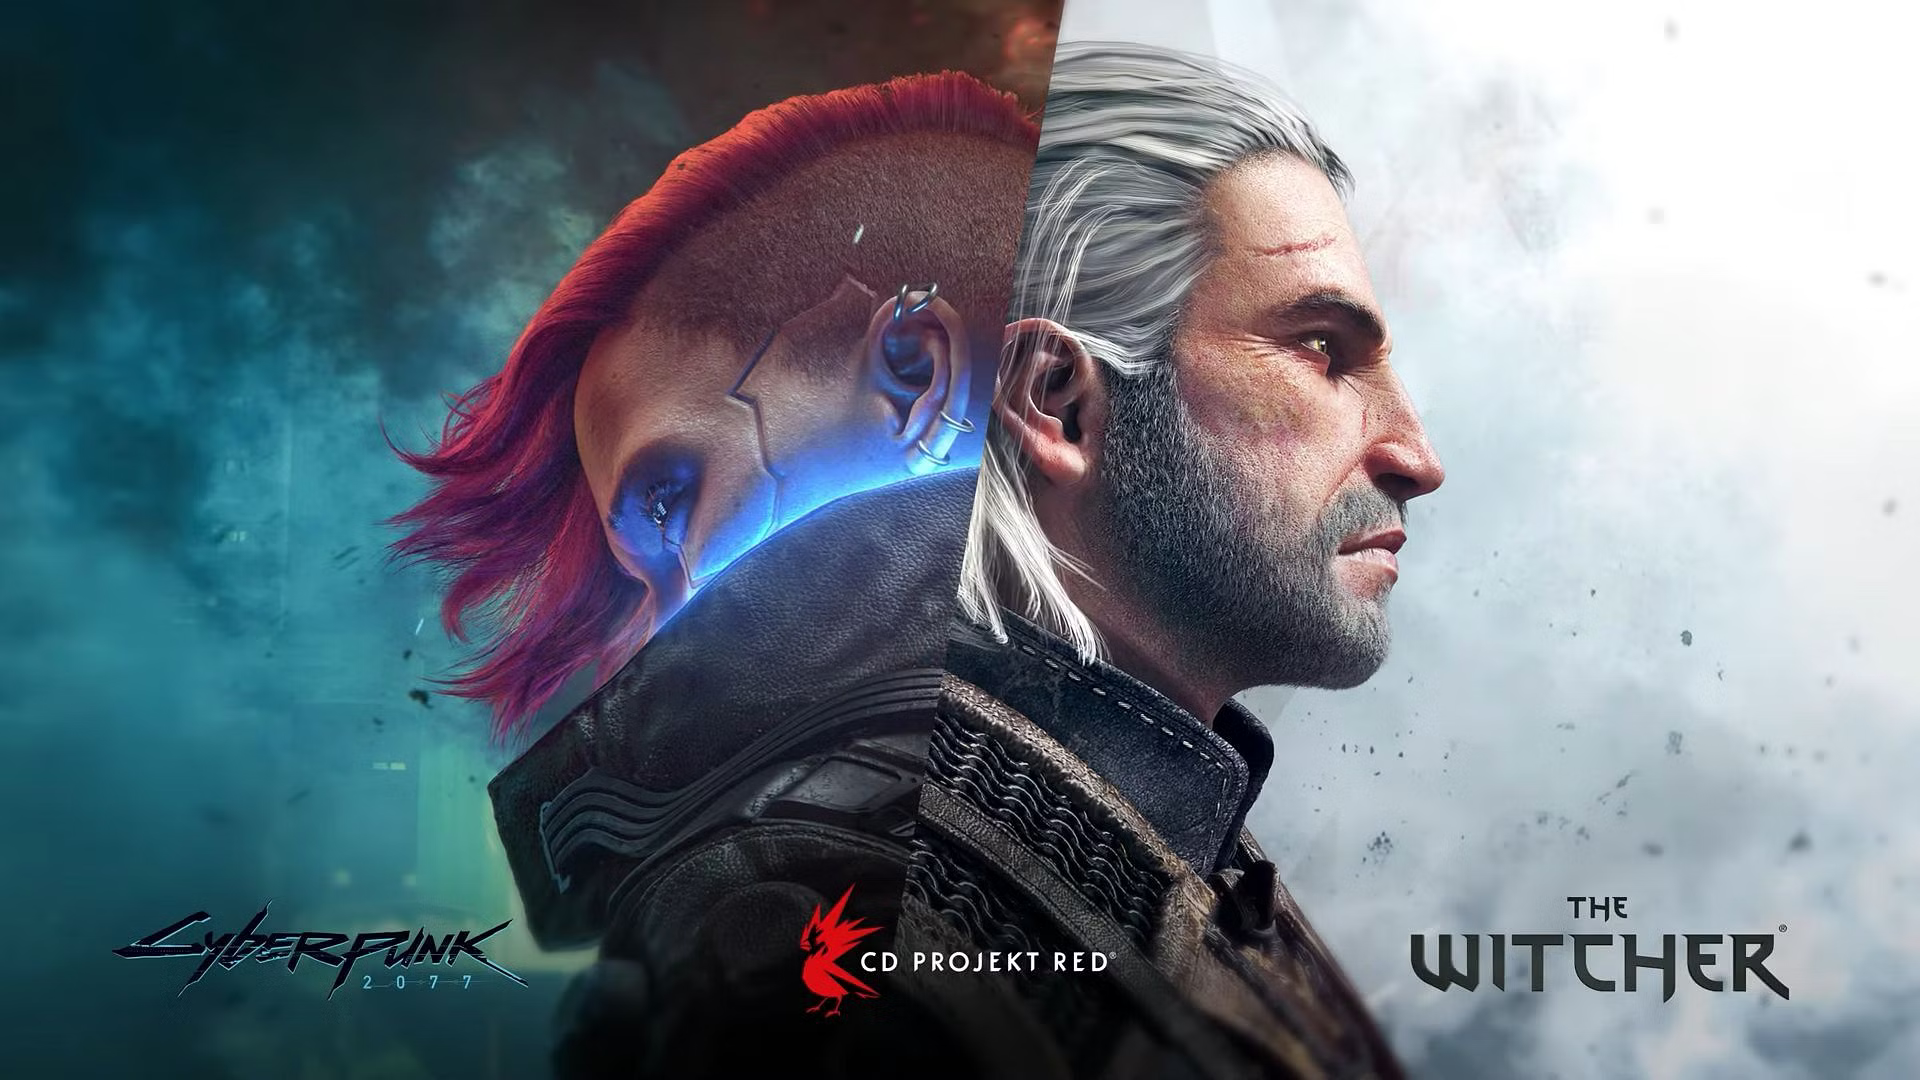 The number of copies sold of The Witcher trilogy and Cyberpunk 2077 exceeds 100 million